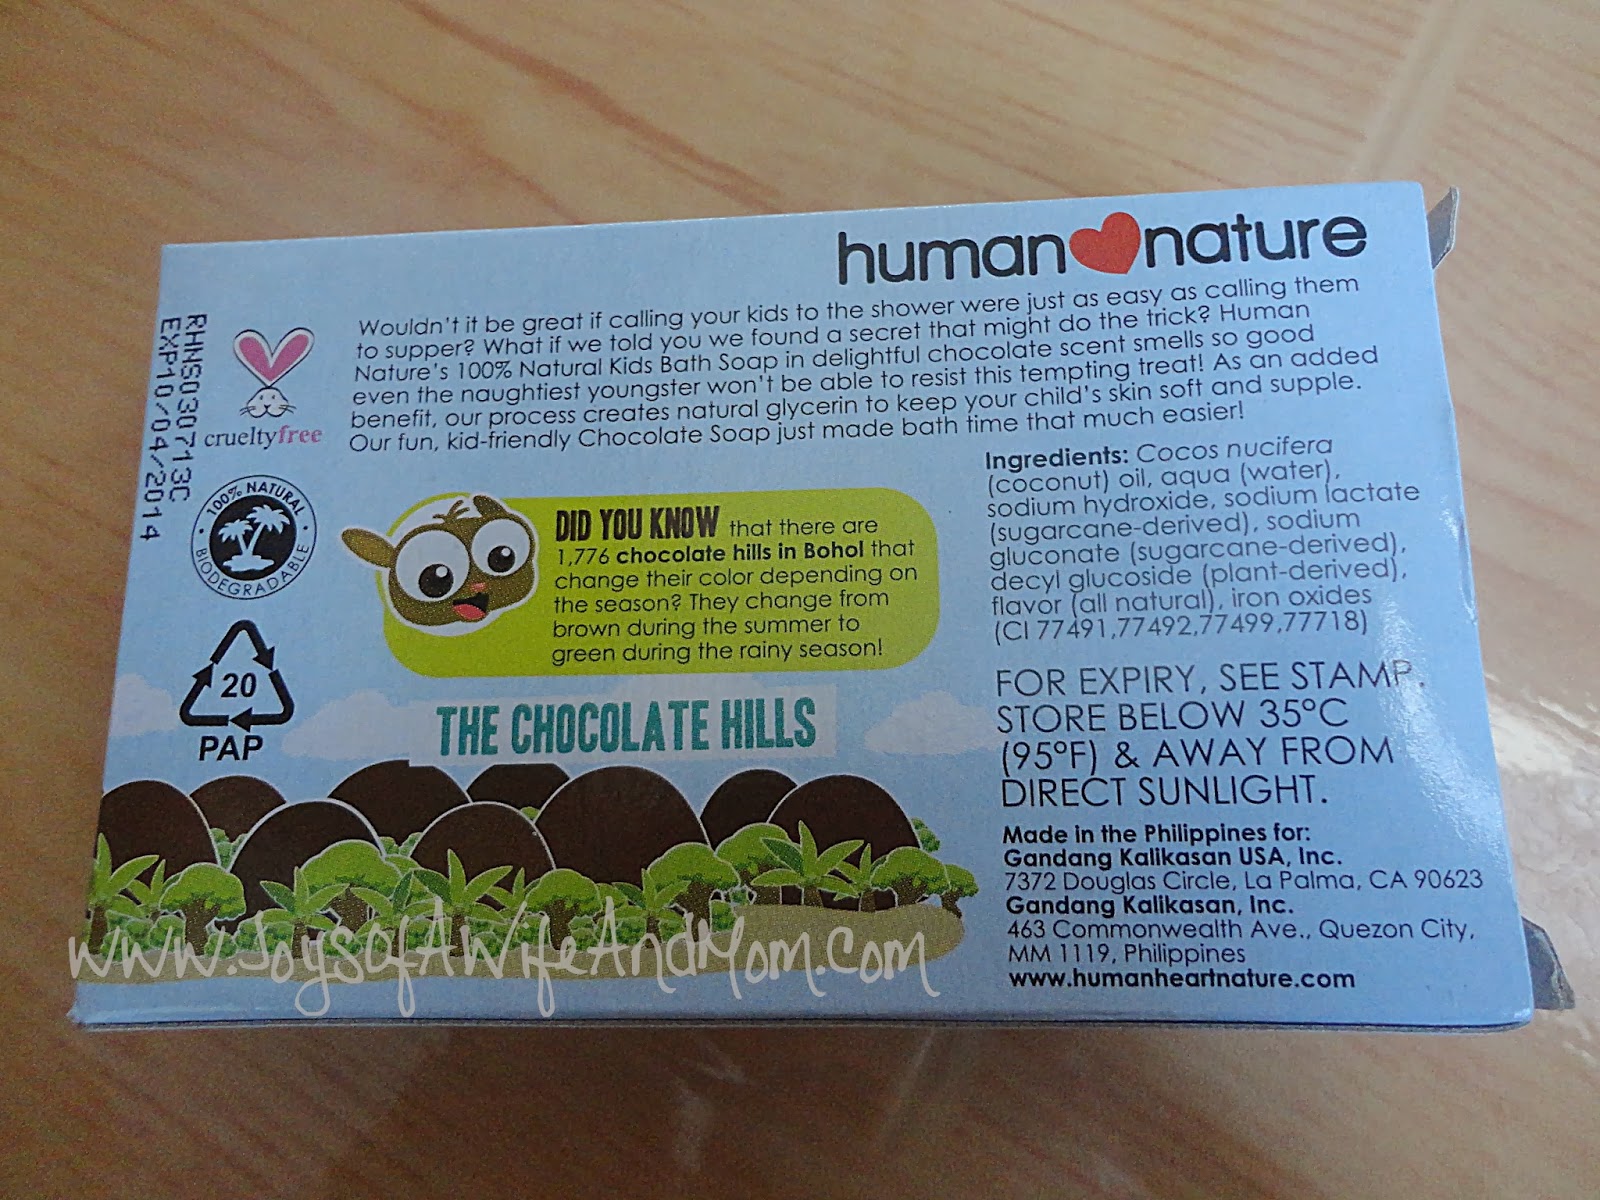 Product Review: Human ♥ Nature Kids 100% Natural Bath Soap (Chocolate Adventure)